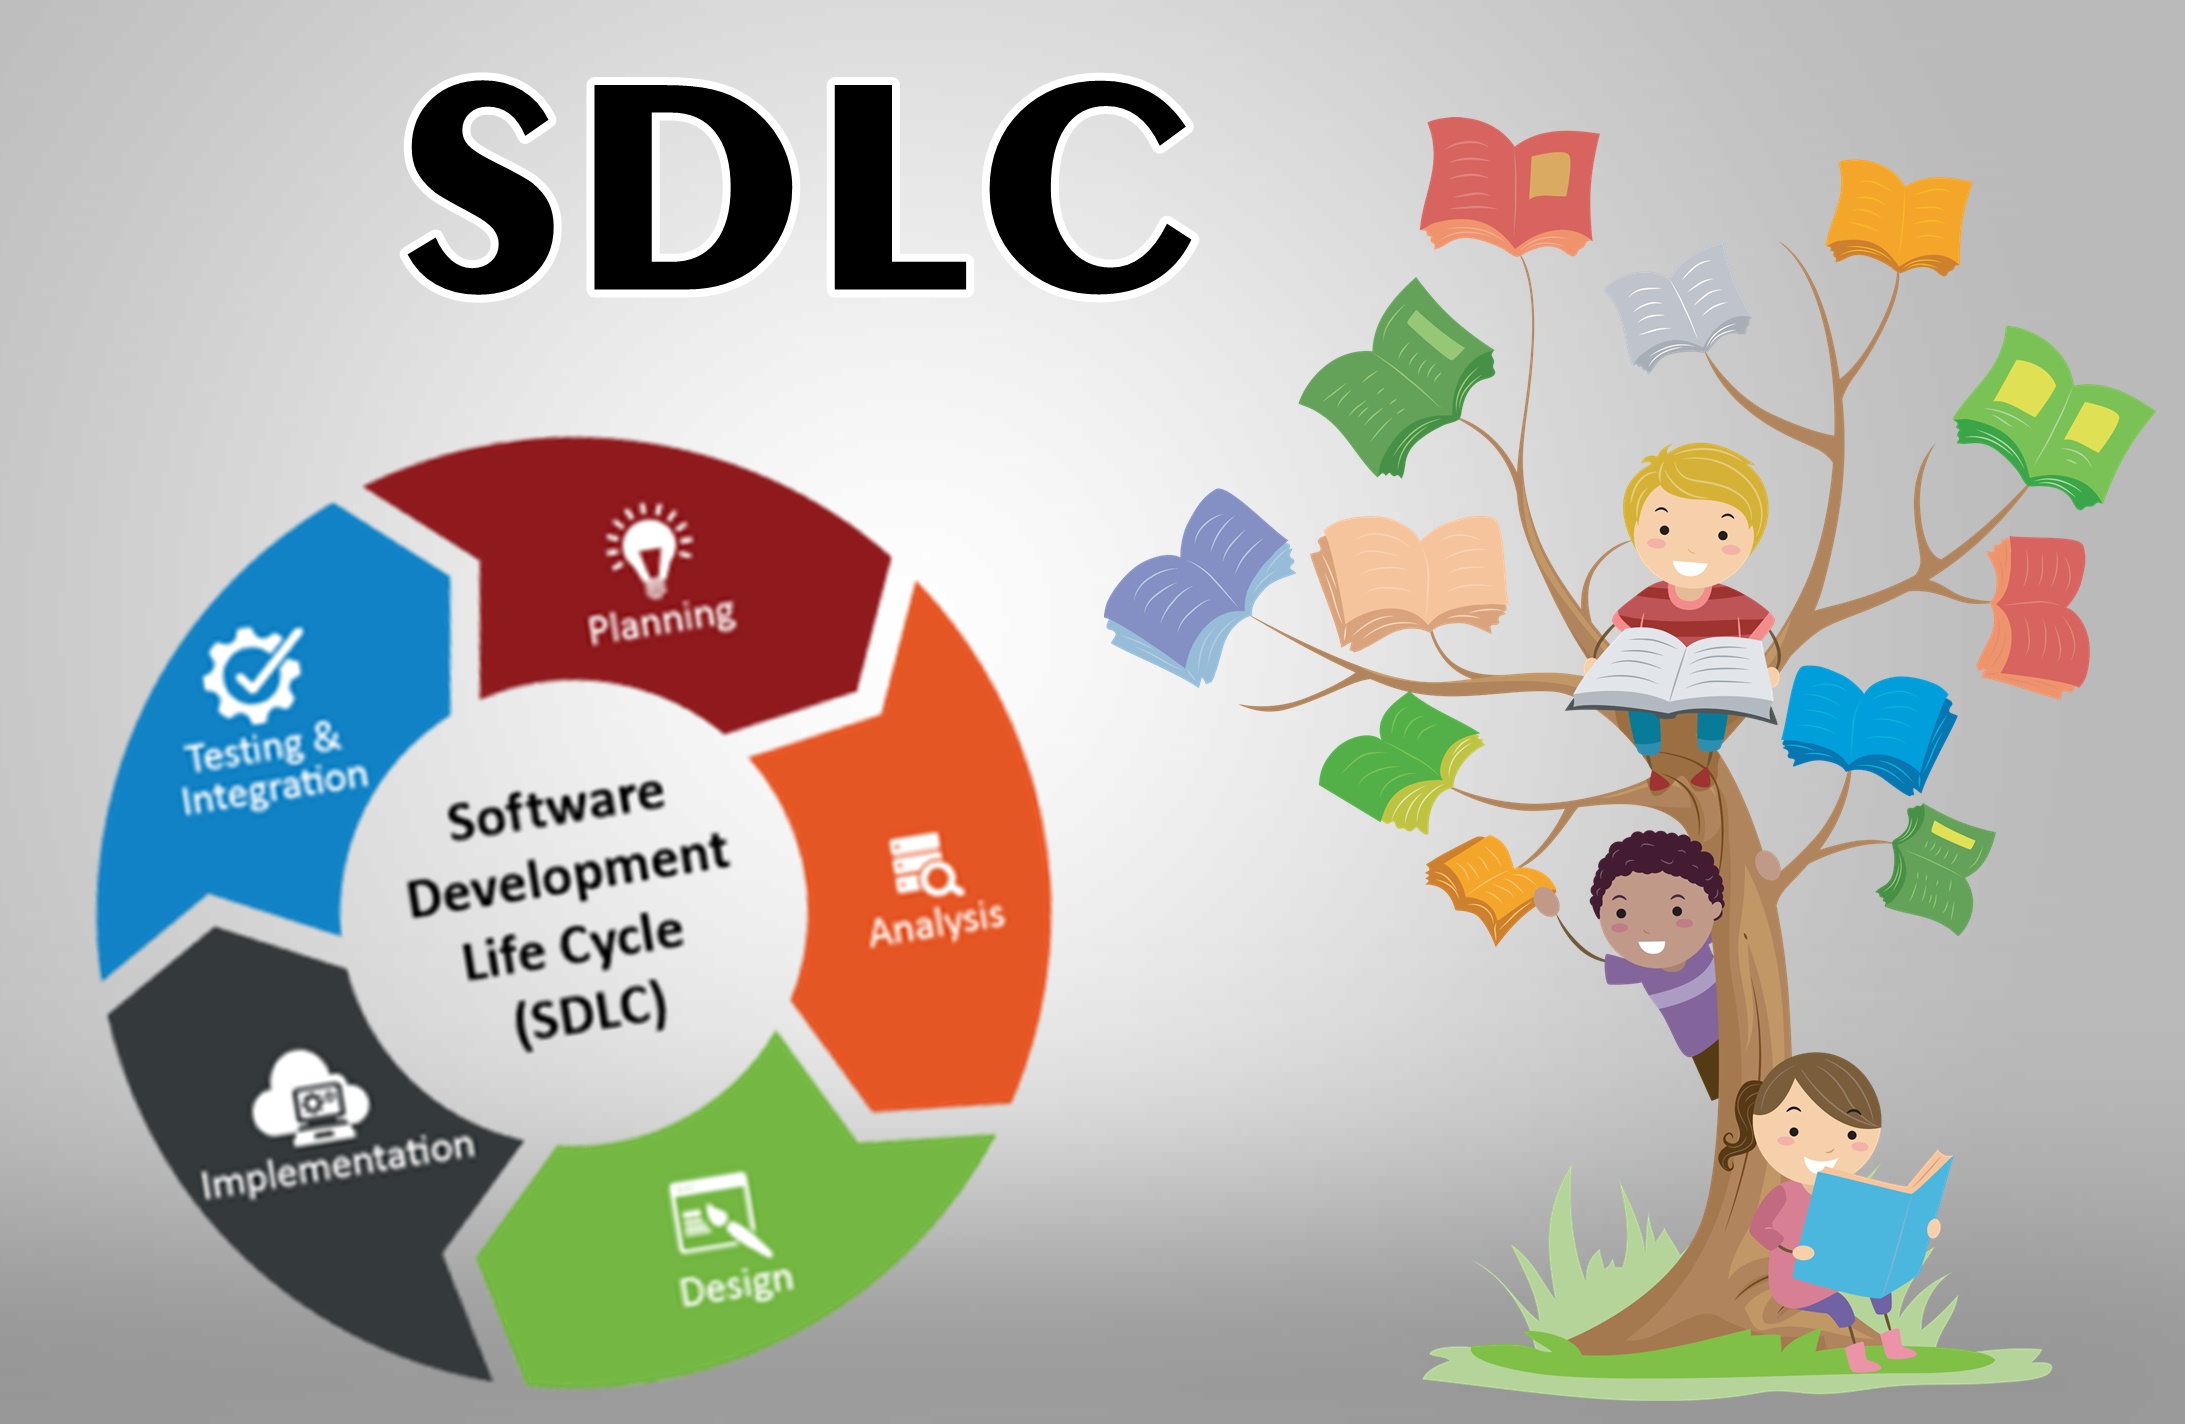 What Is Sdlc What Are The Phases Of Sdlc - vrogue.co